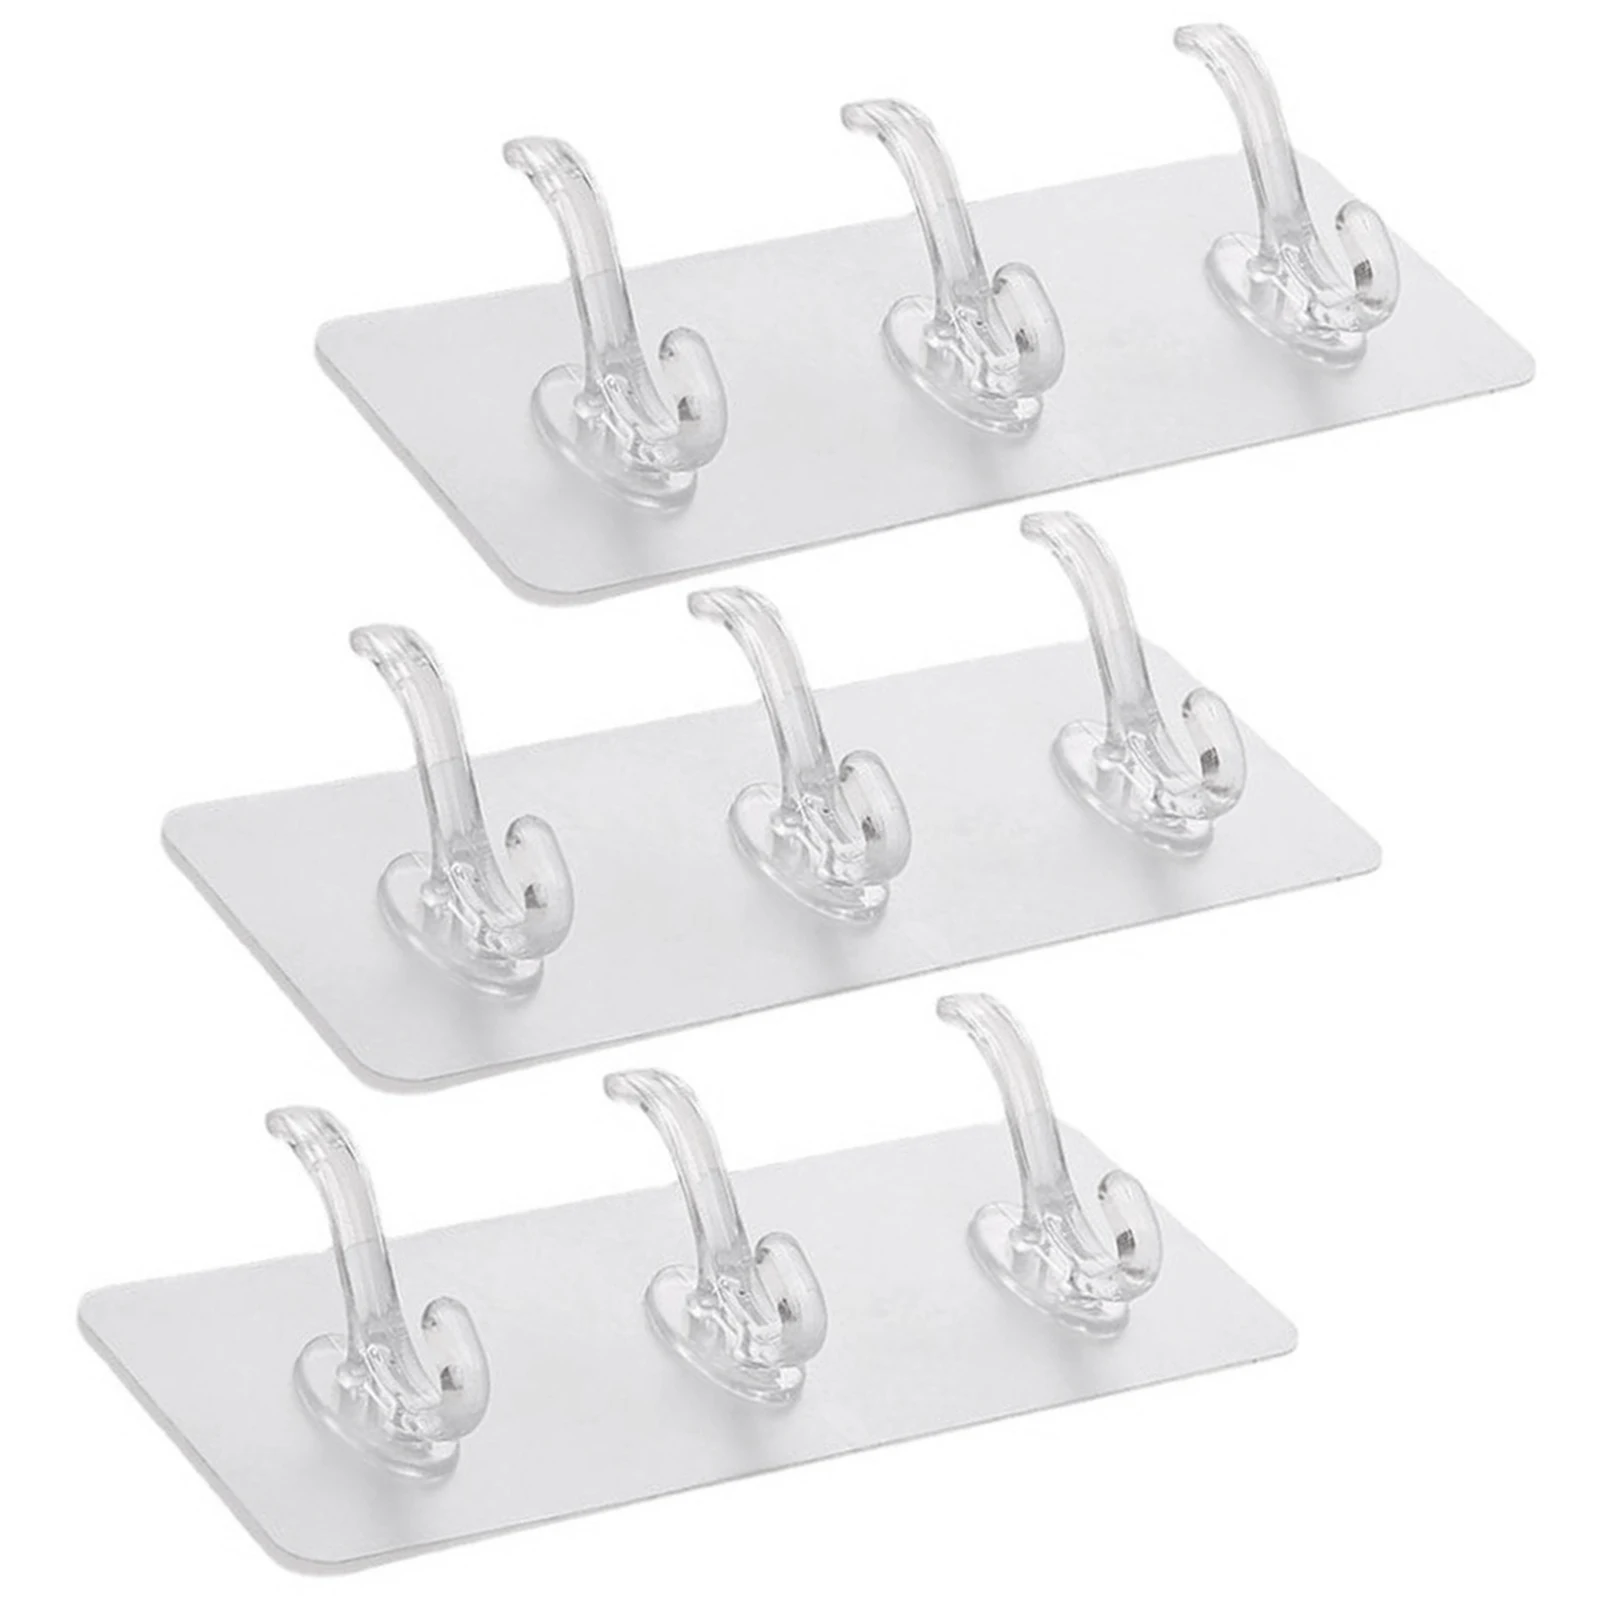 Waterproof 3 Hooks ALIPH- Reusable Self Adhesive Coat Hooks Tape Anti-Rust Multi-Purpose,Wall Mounted Sticky Coat Hooks Rack for Wall Bathroom Kitchen Office Entryway Transparent 